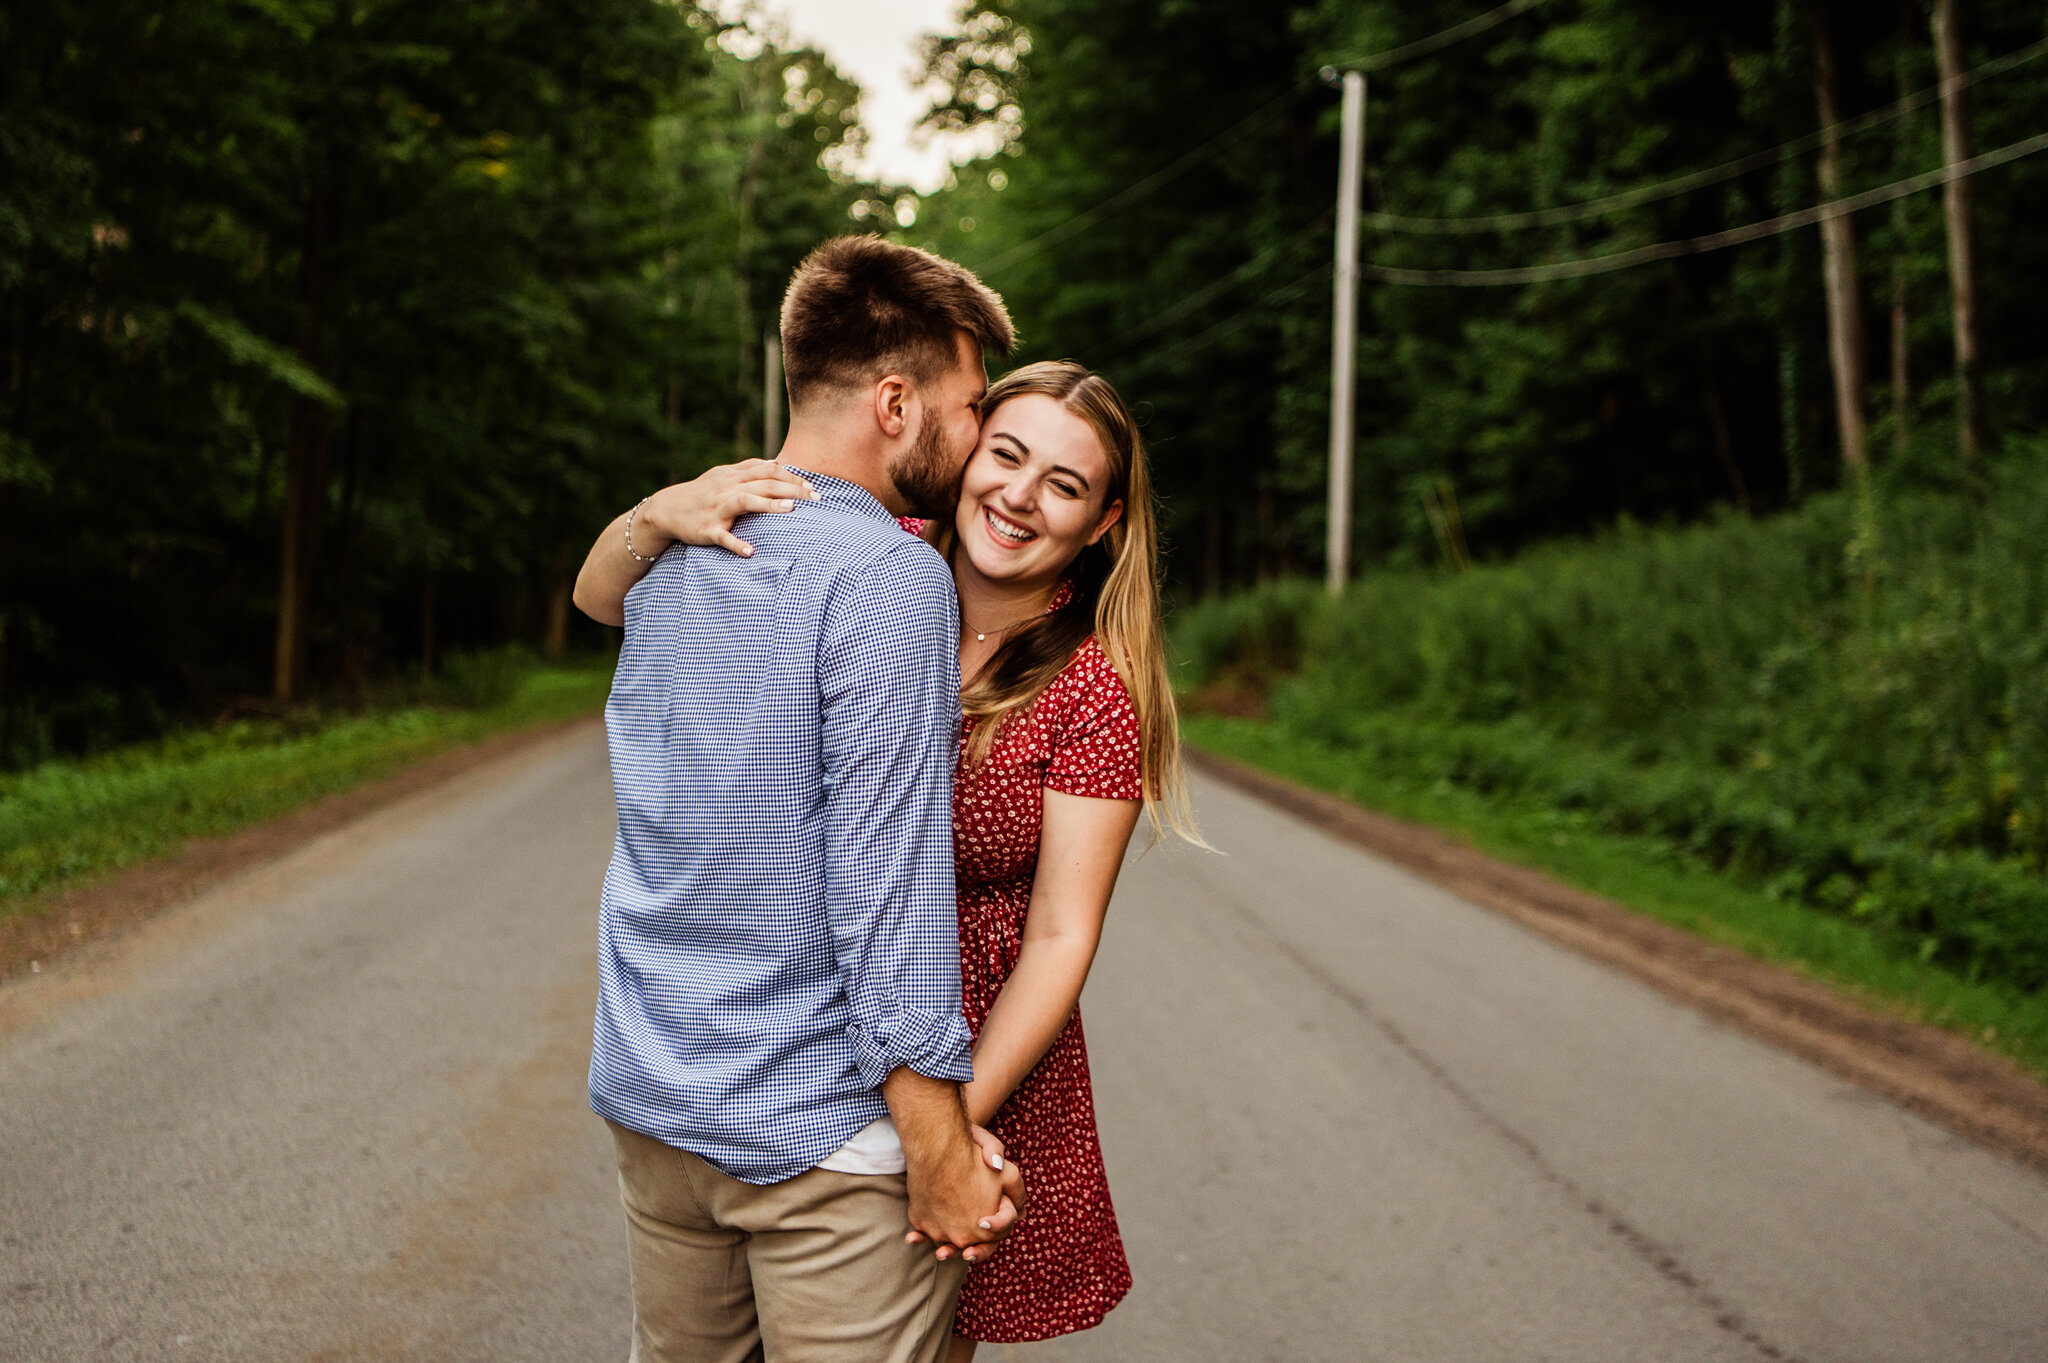 Chimney_Bluffs_State_Park_Rochester_Engagement_Session_JILL_STUDIO_Rochester_NY_Photographer_6950.jpg